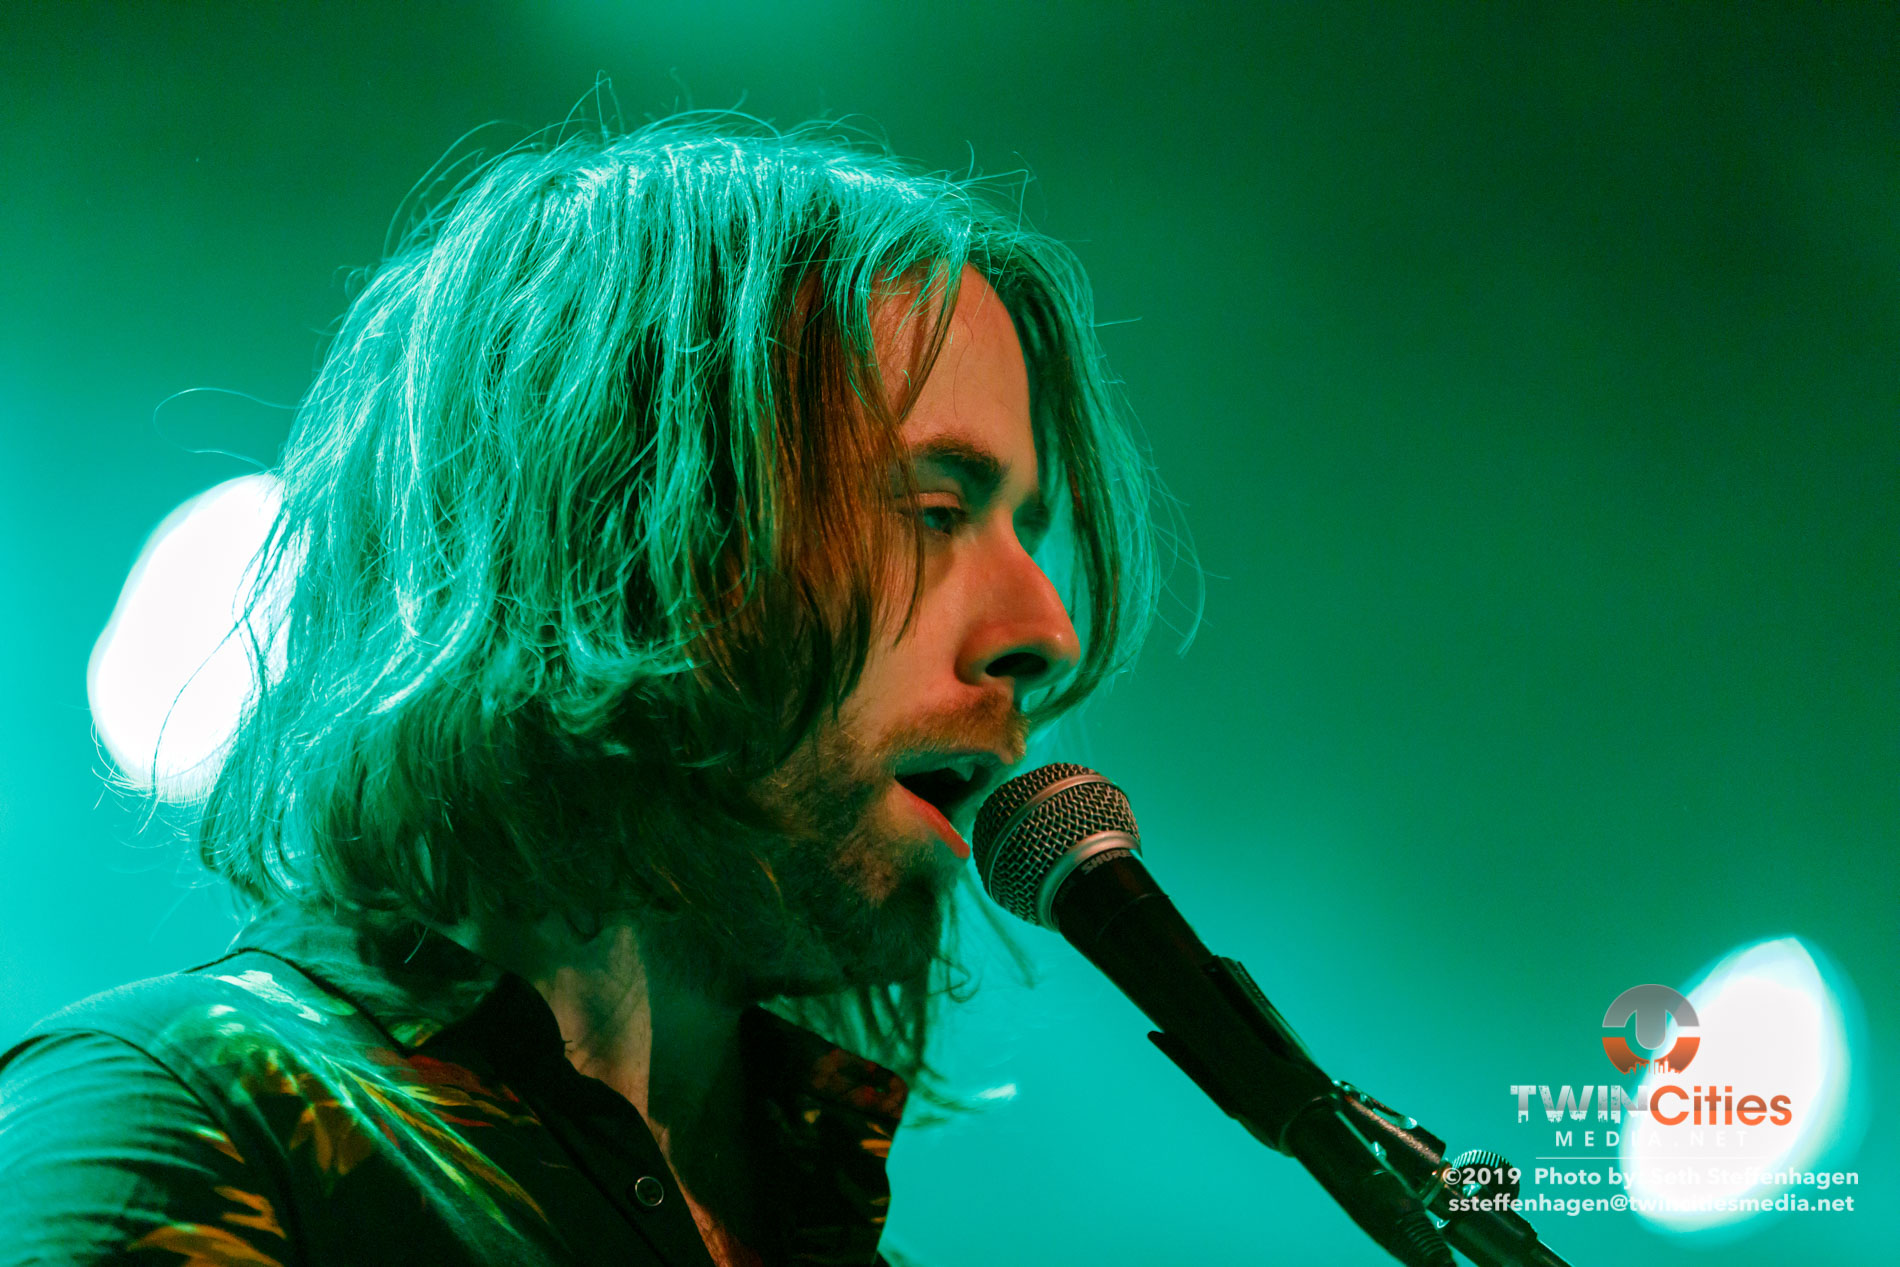 March 25, 2019 - Minneapolis, Minnesota, United States -  Demob Happy live in concert at First Avenue opening for Uncle Acid And The Deadbeats.

(Photo by Seth Steffenhagen/Steffenhagen Photography)